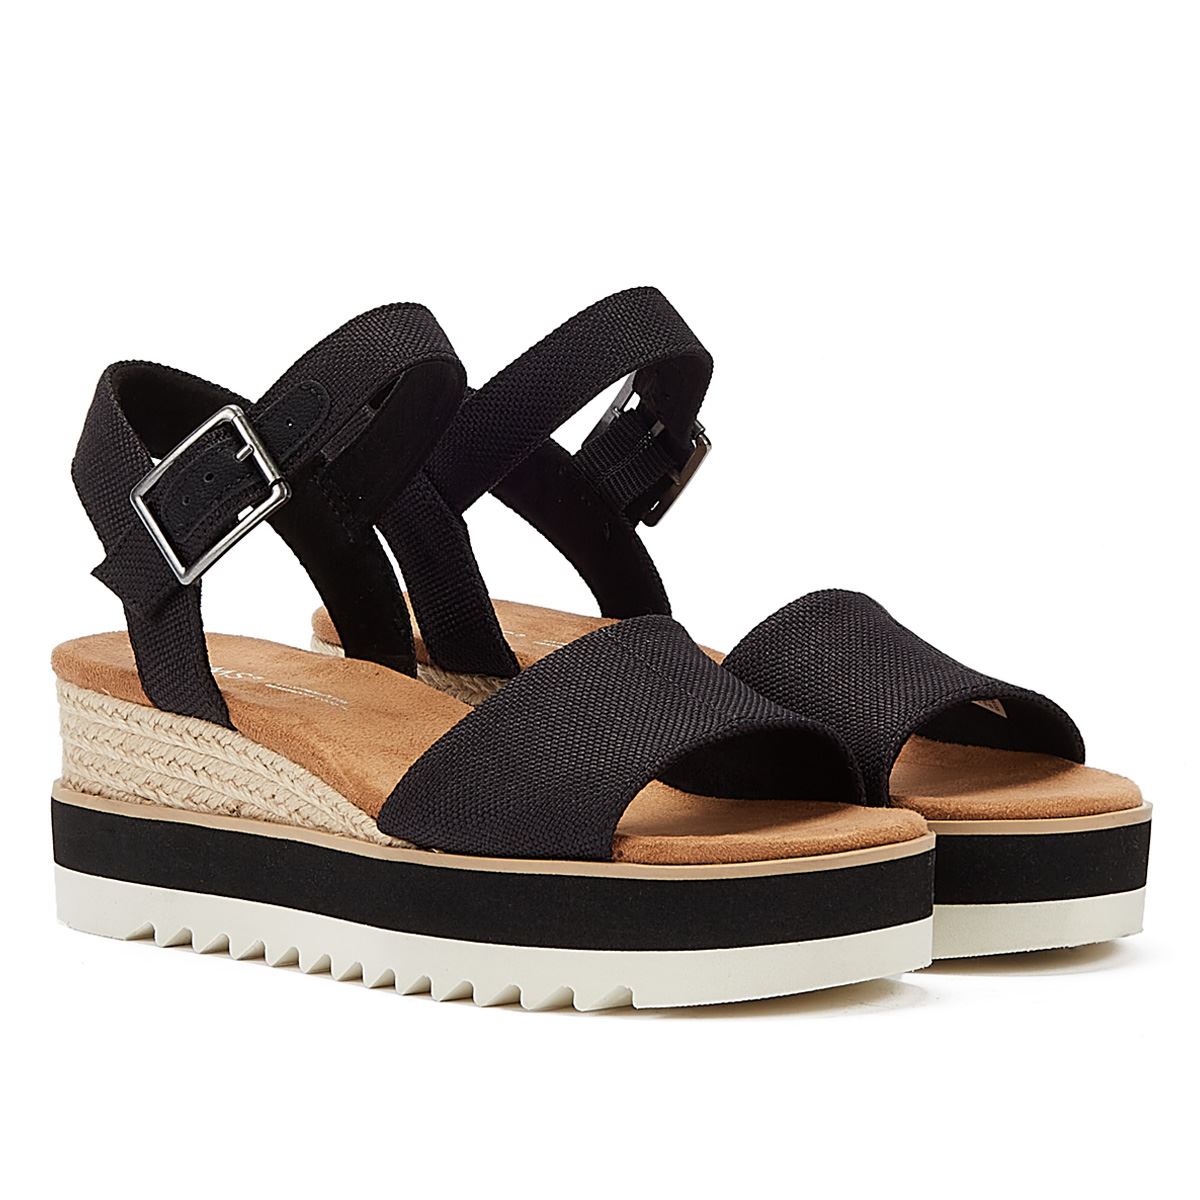 TOMS Marisol Open Toe Ankle Strap Wedge Sandals in Black | Lyst